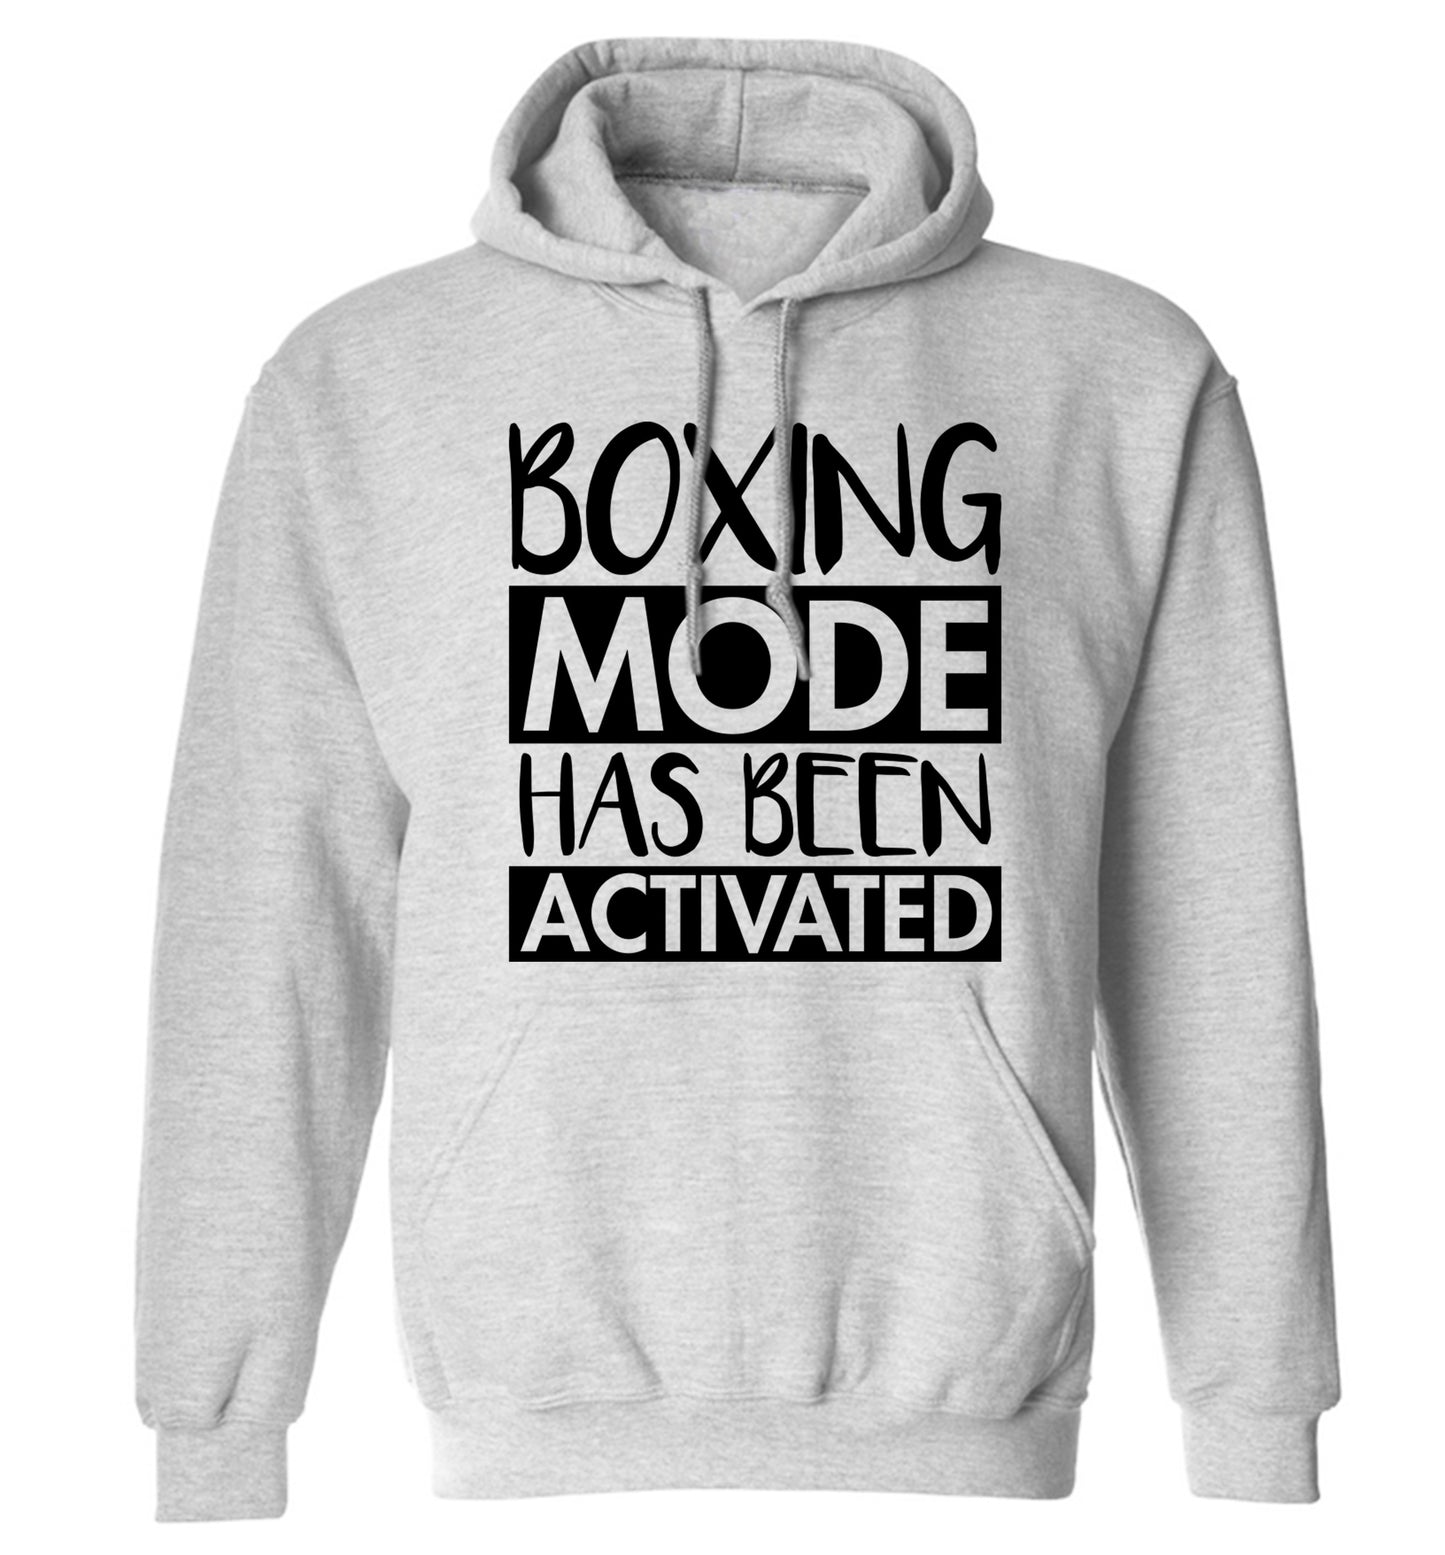 Boxing mode activated adults unisex grey hoodie 2XL